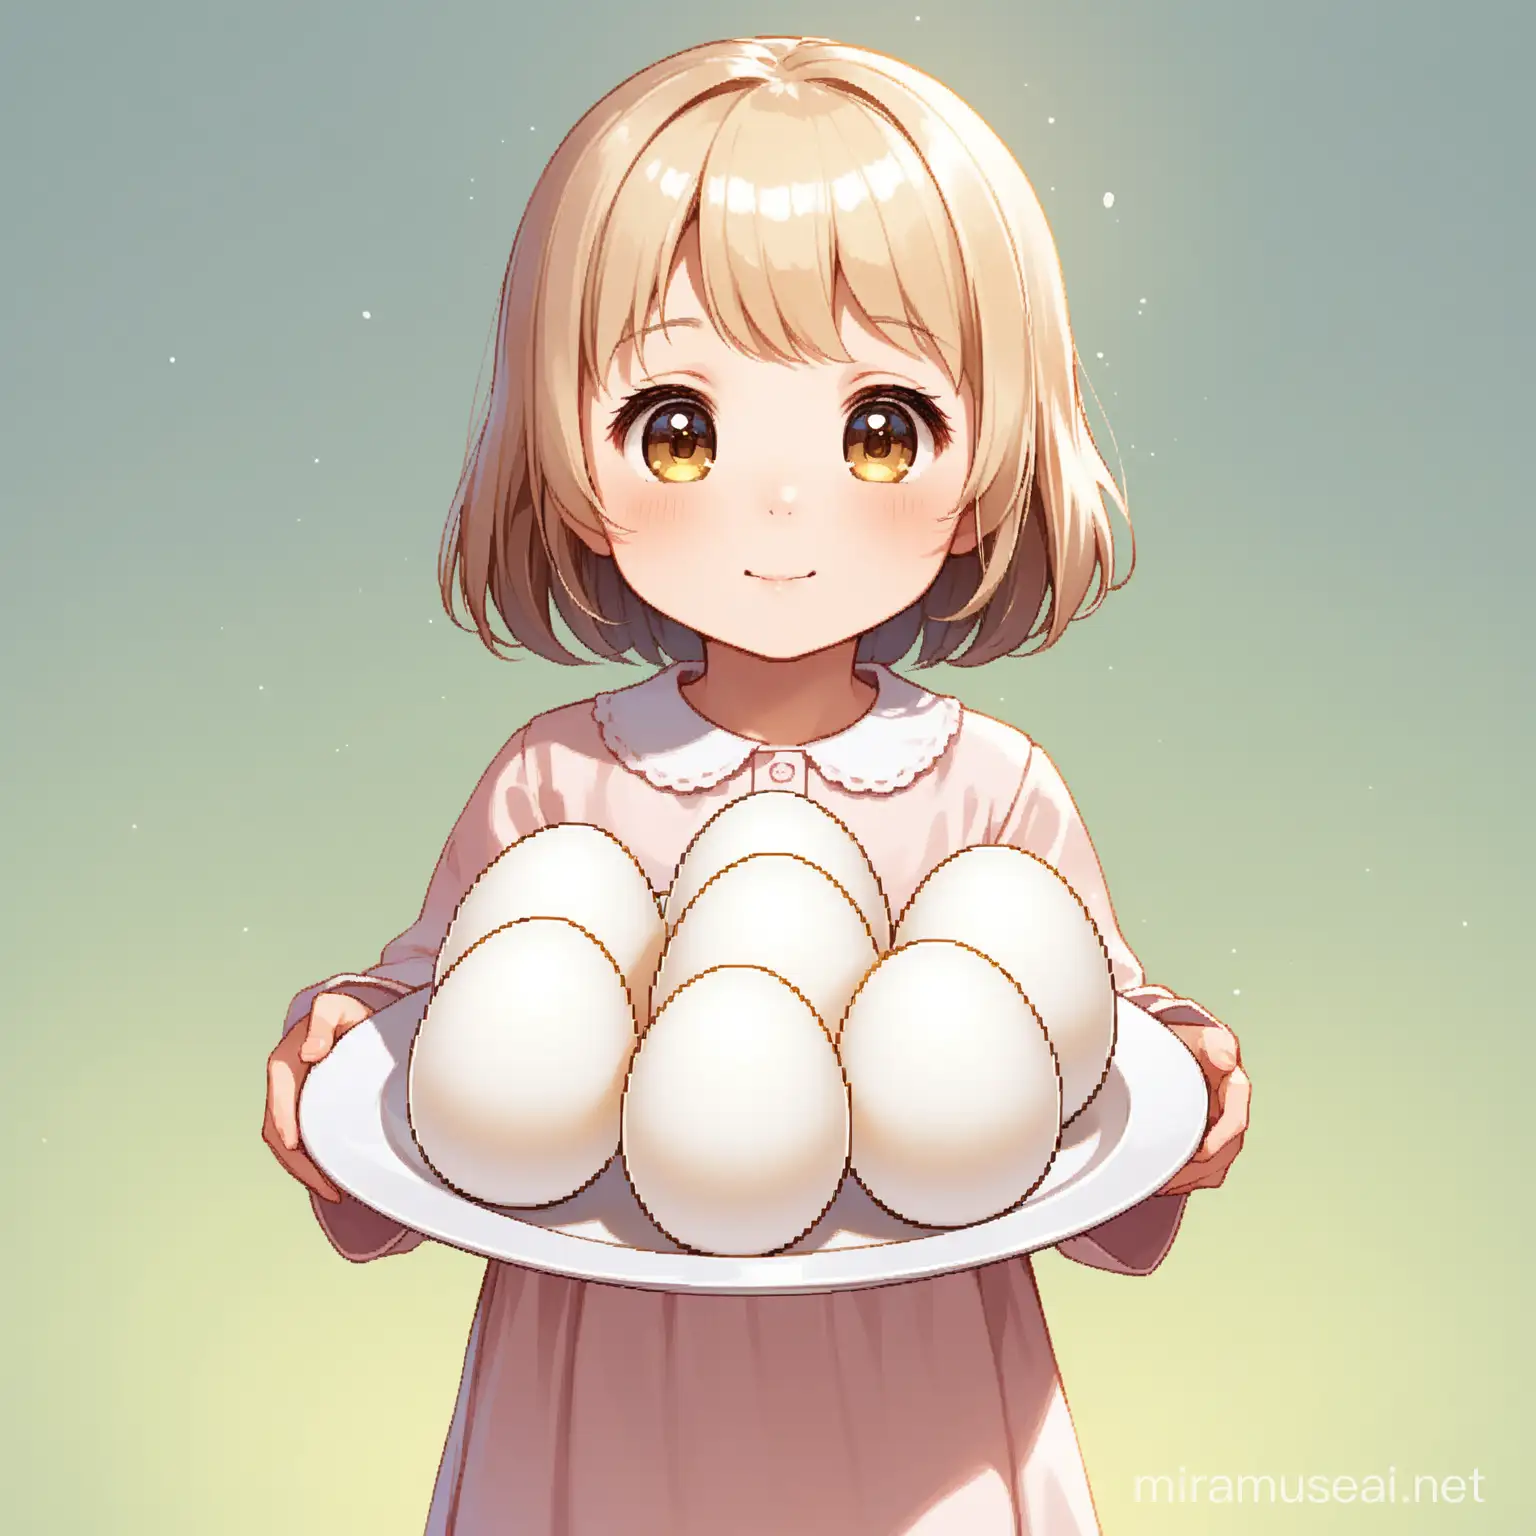 Generate animation picture of a small girl holding a plate of ten white eggs